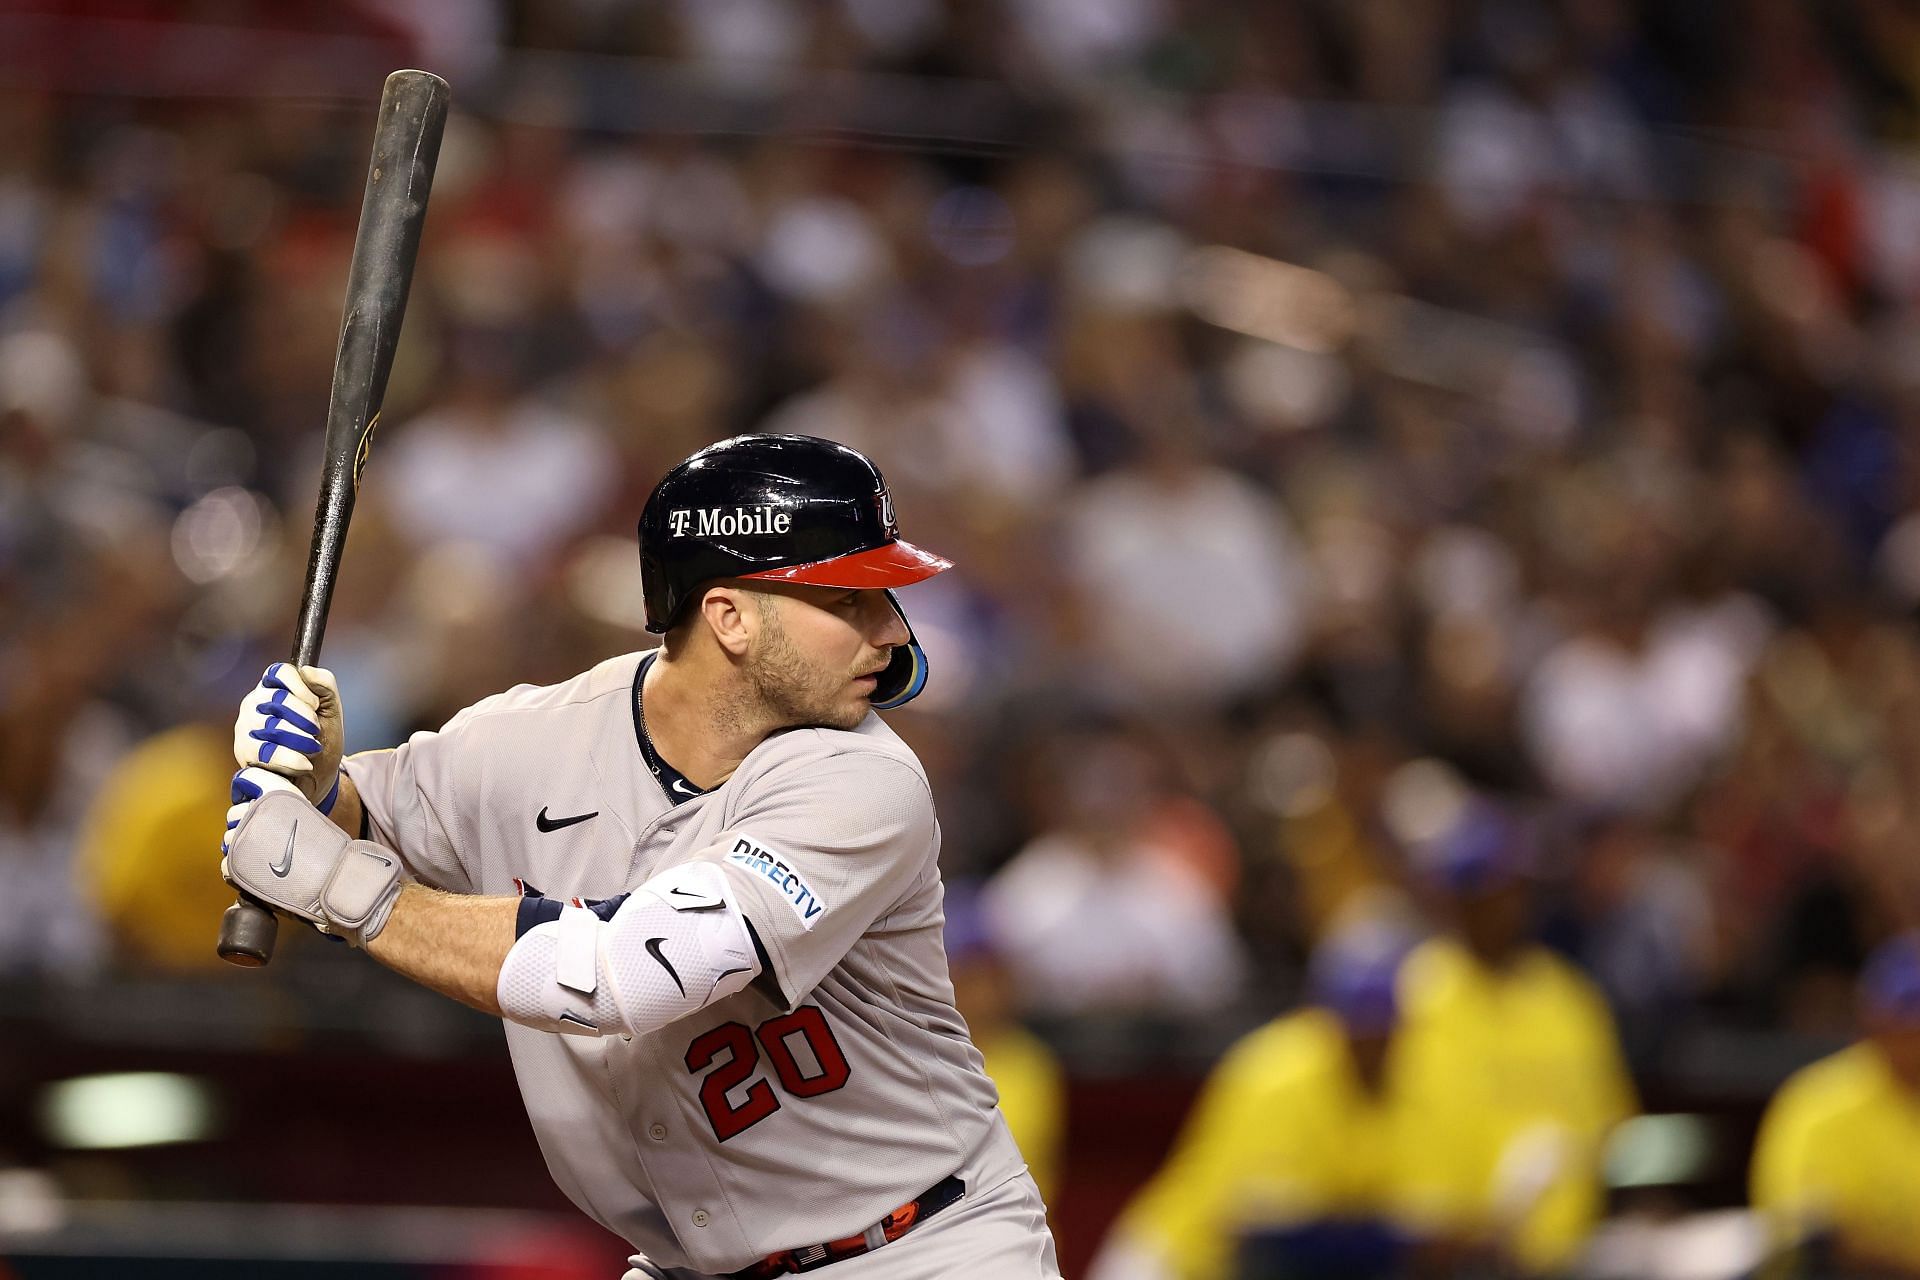 Pete Alonso of Team USA bats against Team Colombia during the World Baseball Classic Pool C game.